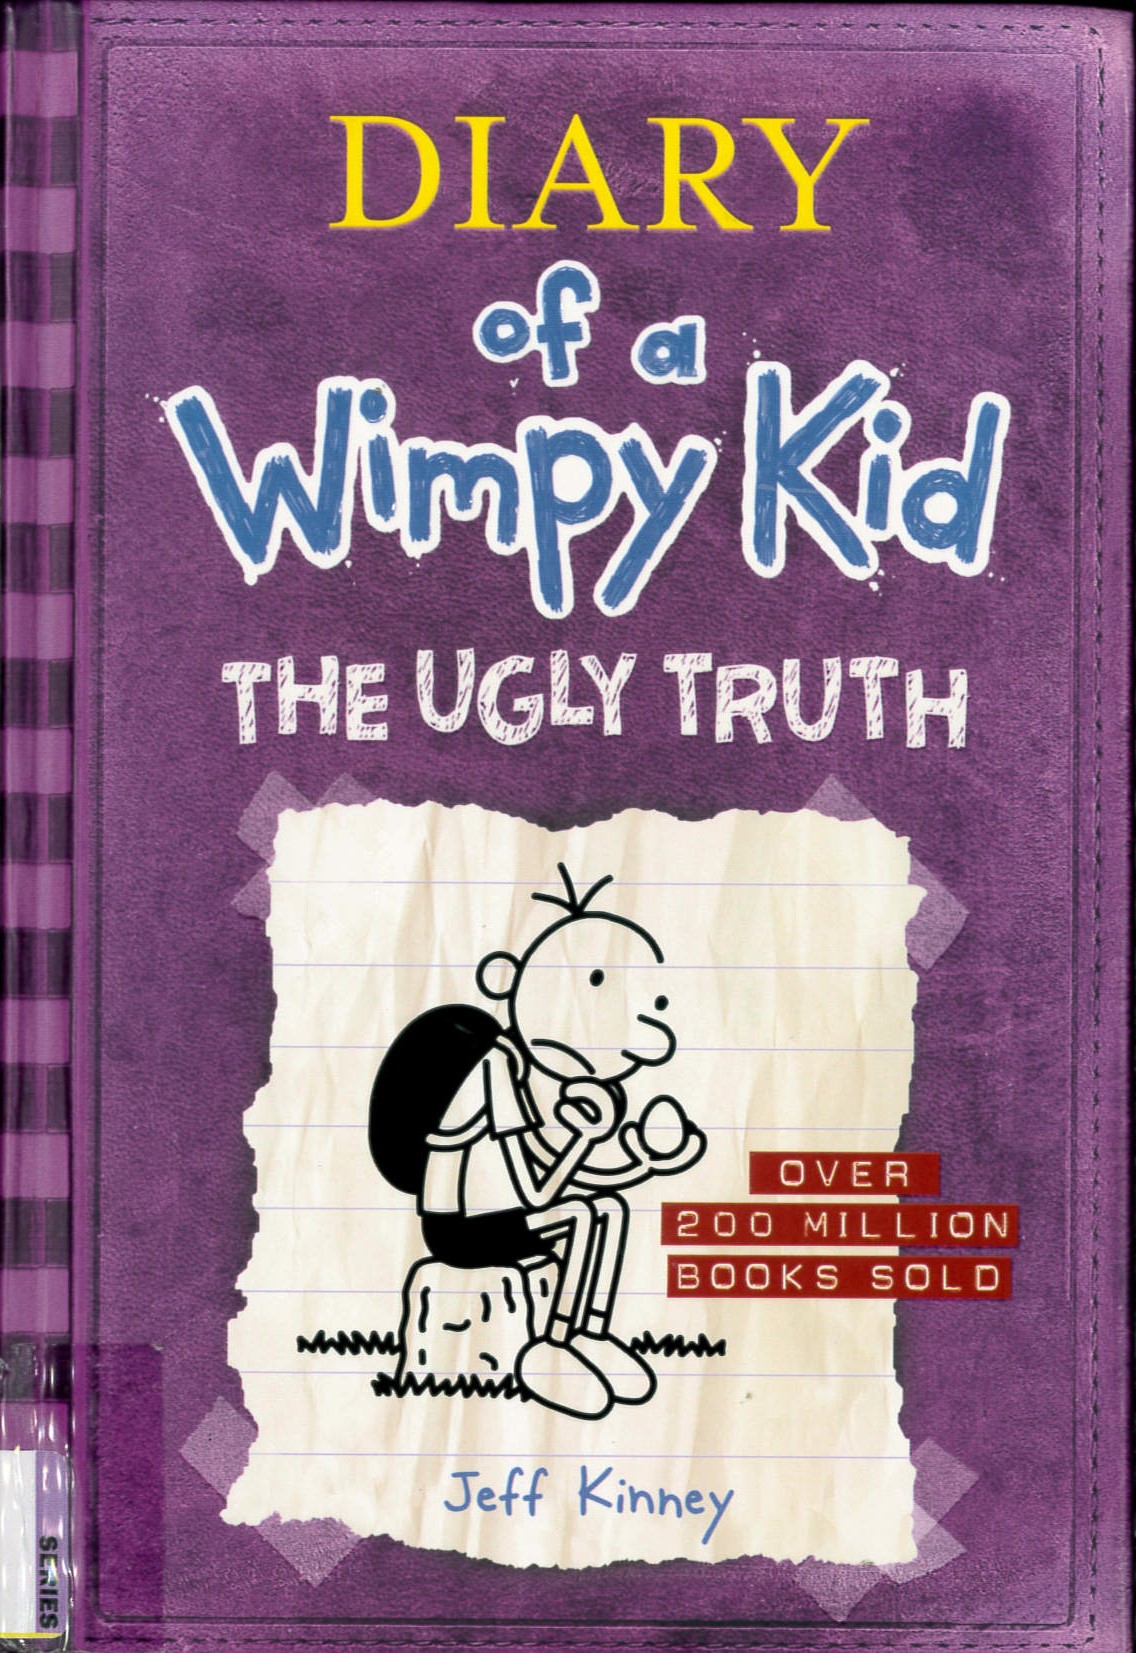 Diary of a wimpy kid(5) : the ugly truth /